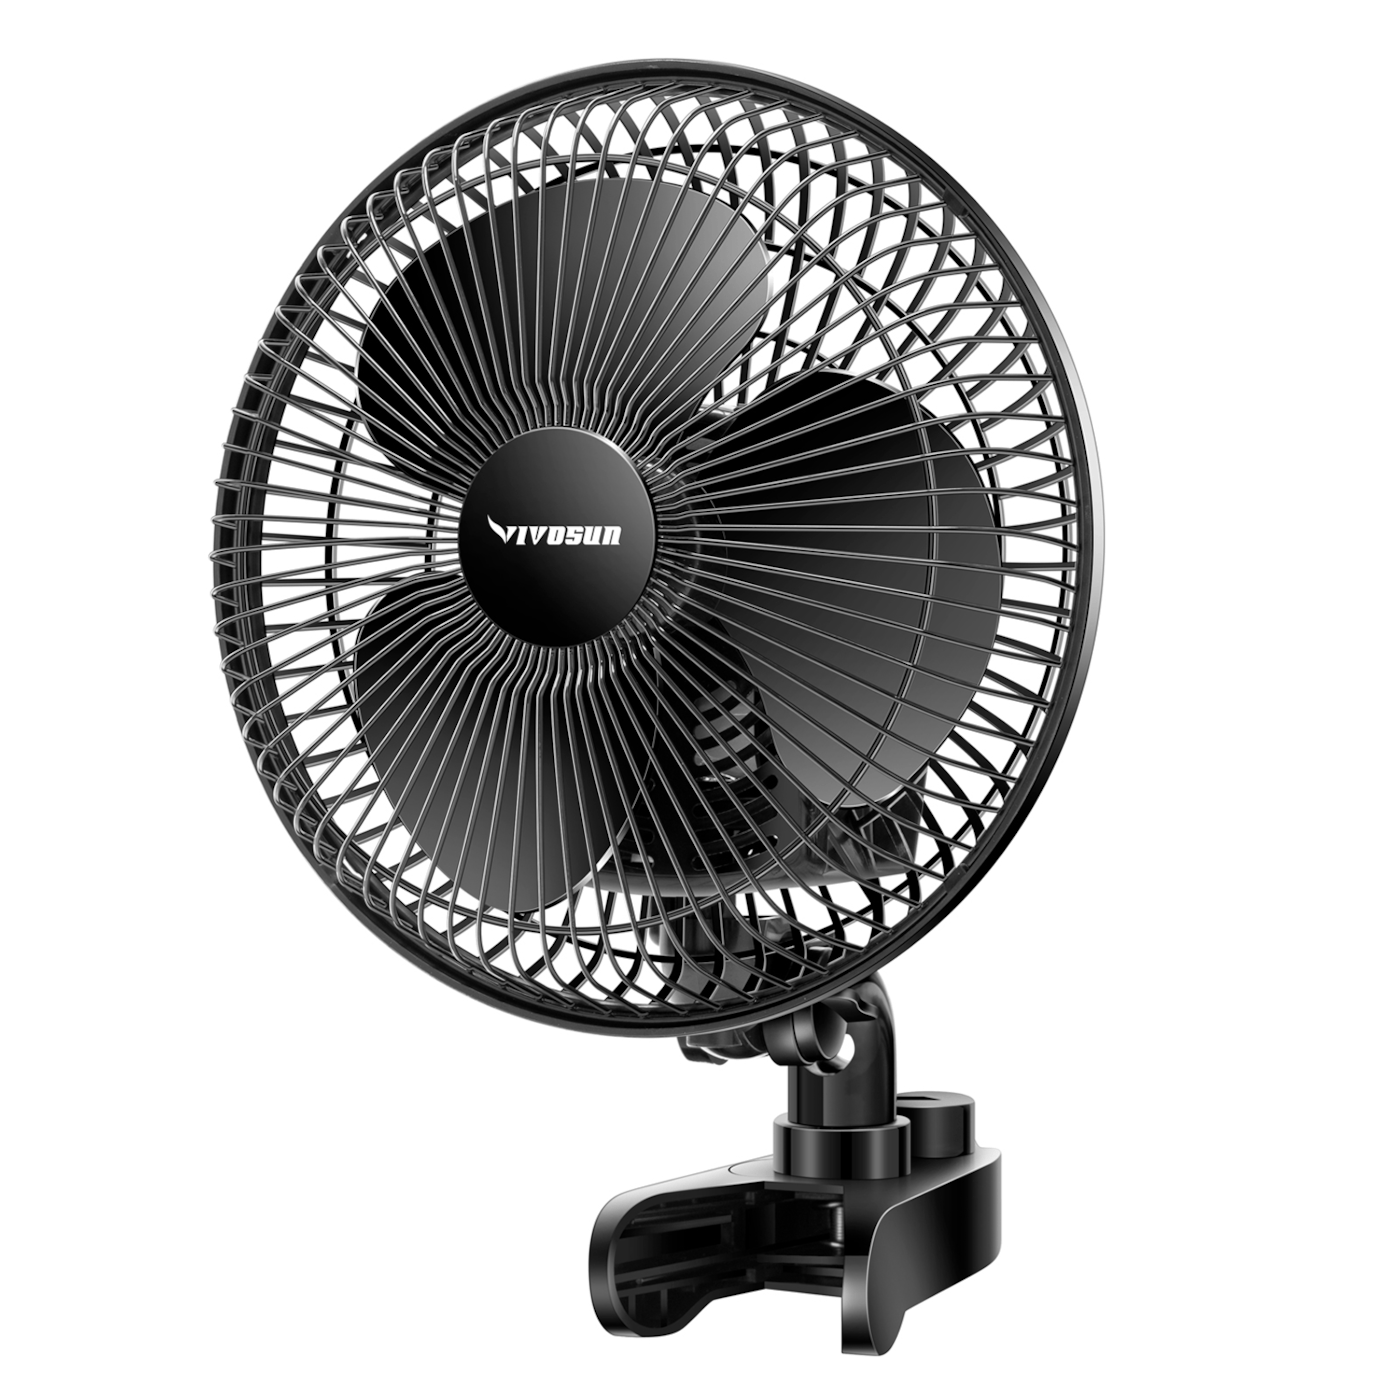 VIVOSUN AeroWave A6 Patented Clip-on Fan with 2-Speed Adjustment - Black